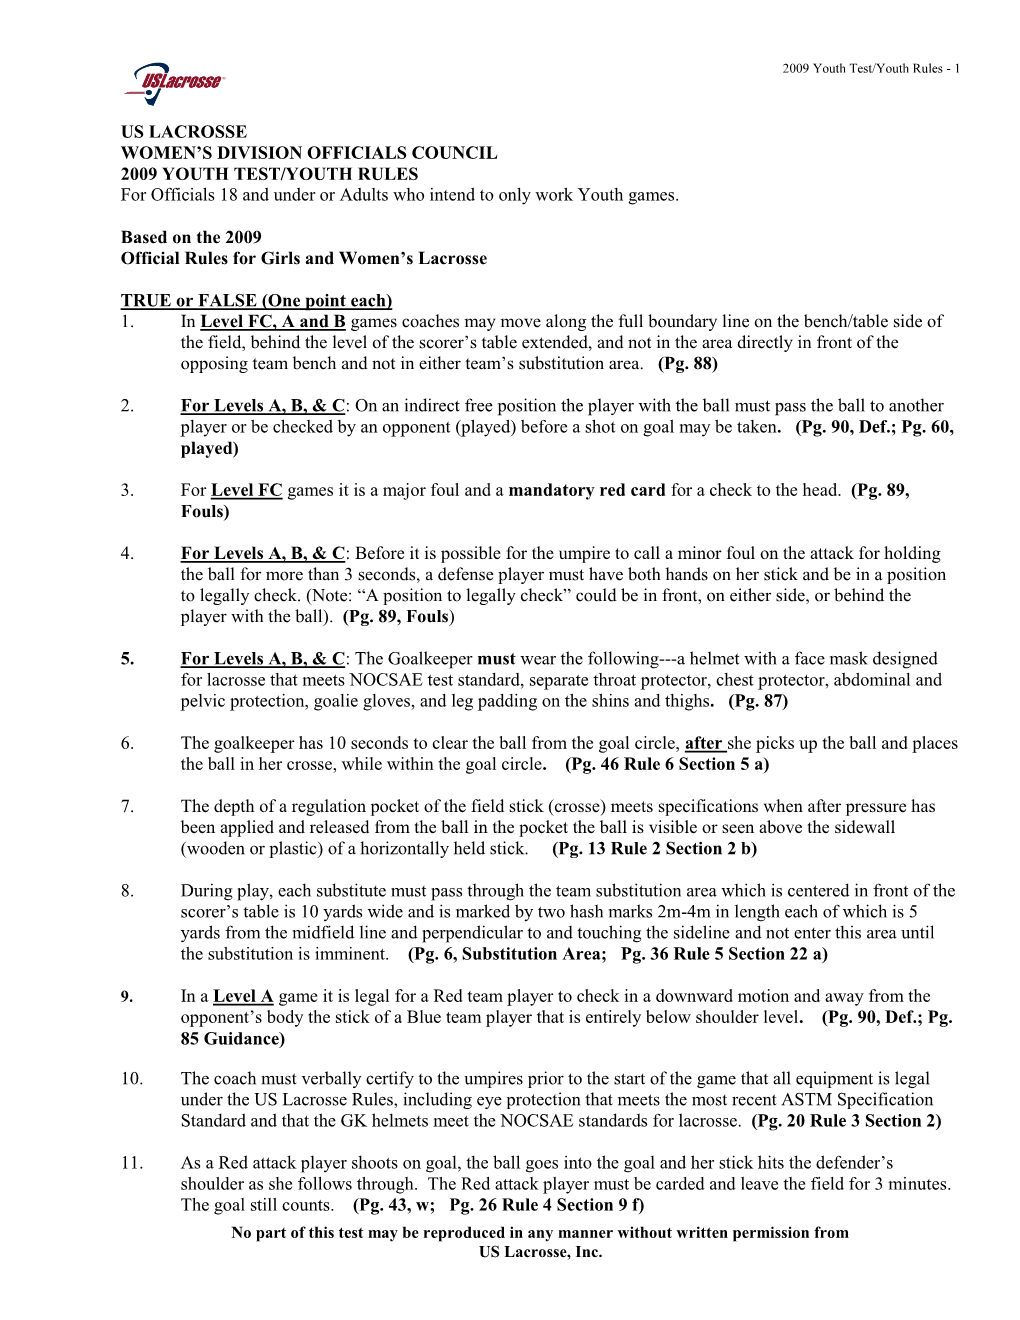 US LACROSSE WOMEN’S DIVISION OFFICIALS COUNCIL 2009 YOUTH TEST/YOUTH RULES for Officials 18 and Under Or Adults Who Intend to Only Work Youth Games